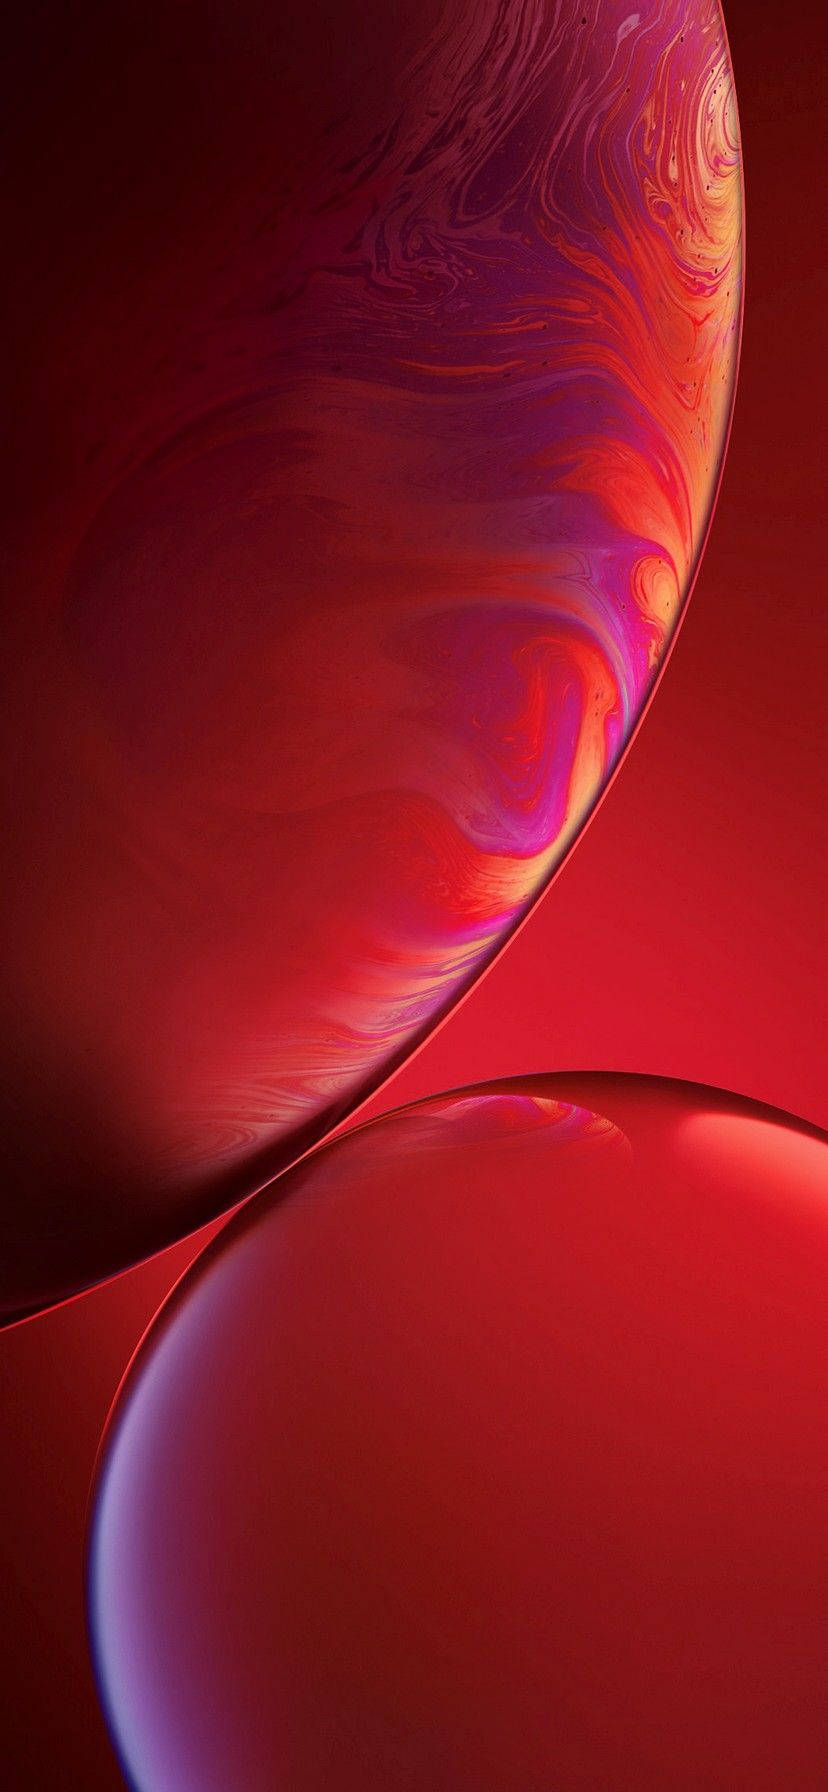 Iphone Xr Red Swirled Bubbles Picture